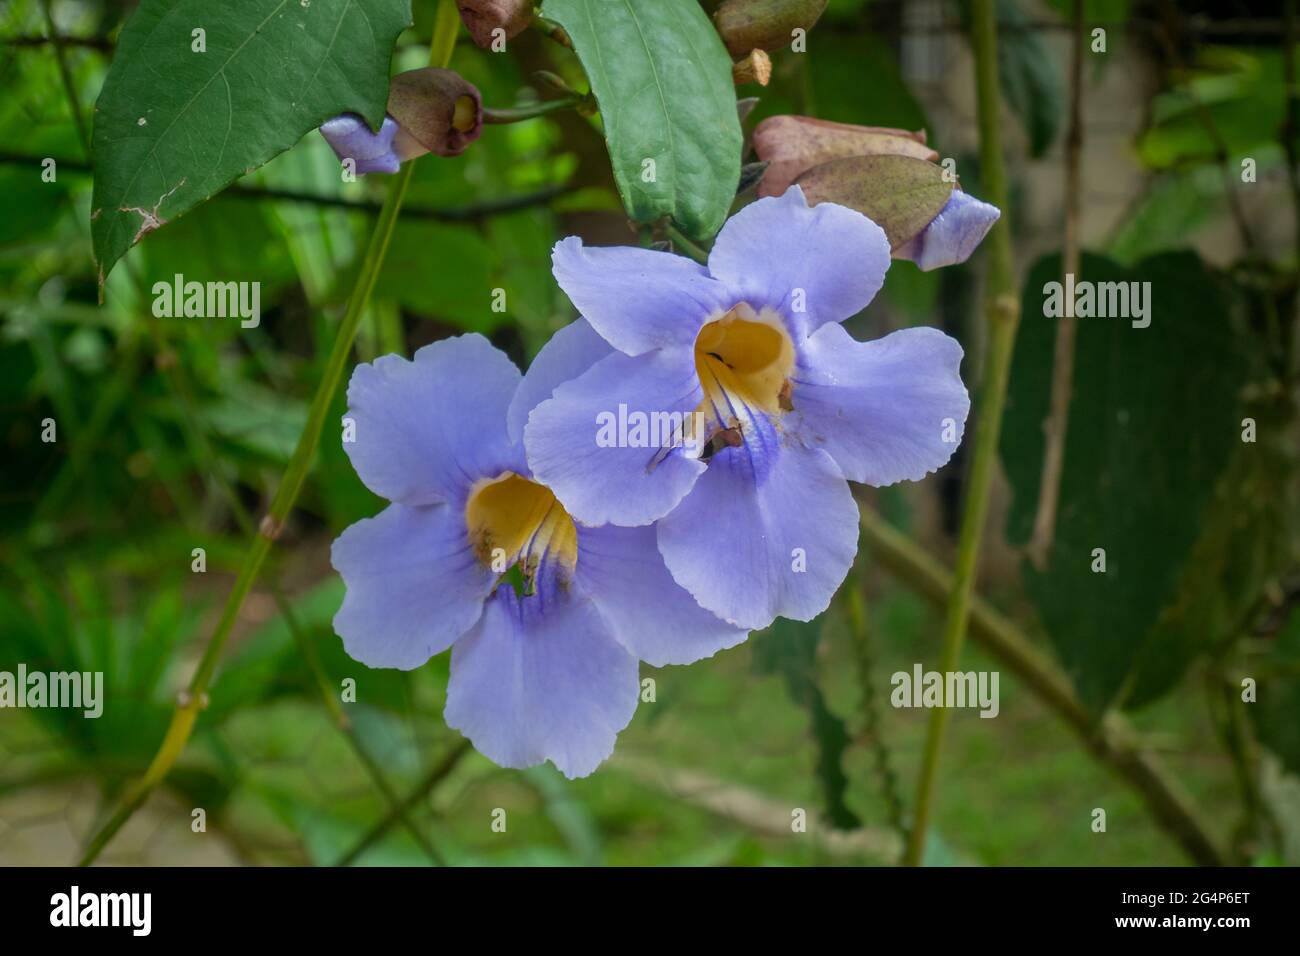 Purple Flower Knows as Bengal Clockvine, Bengal Trumpet, Blue Skyflower, Blue Thunbergia and Skyvine (Thunbergia grandiflora) is in the Garden in Minc Stock Photo